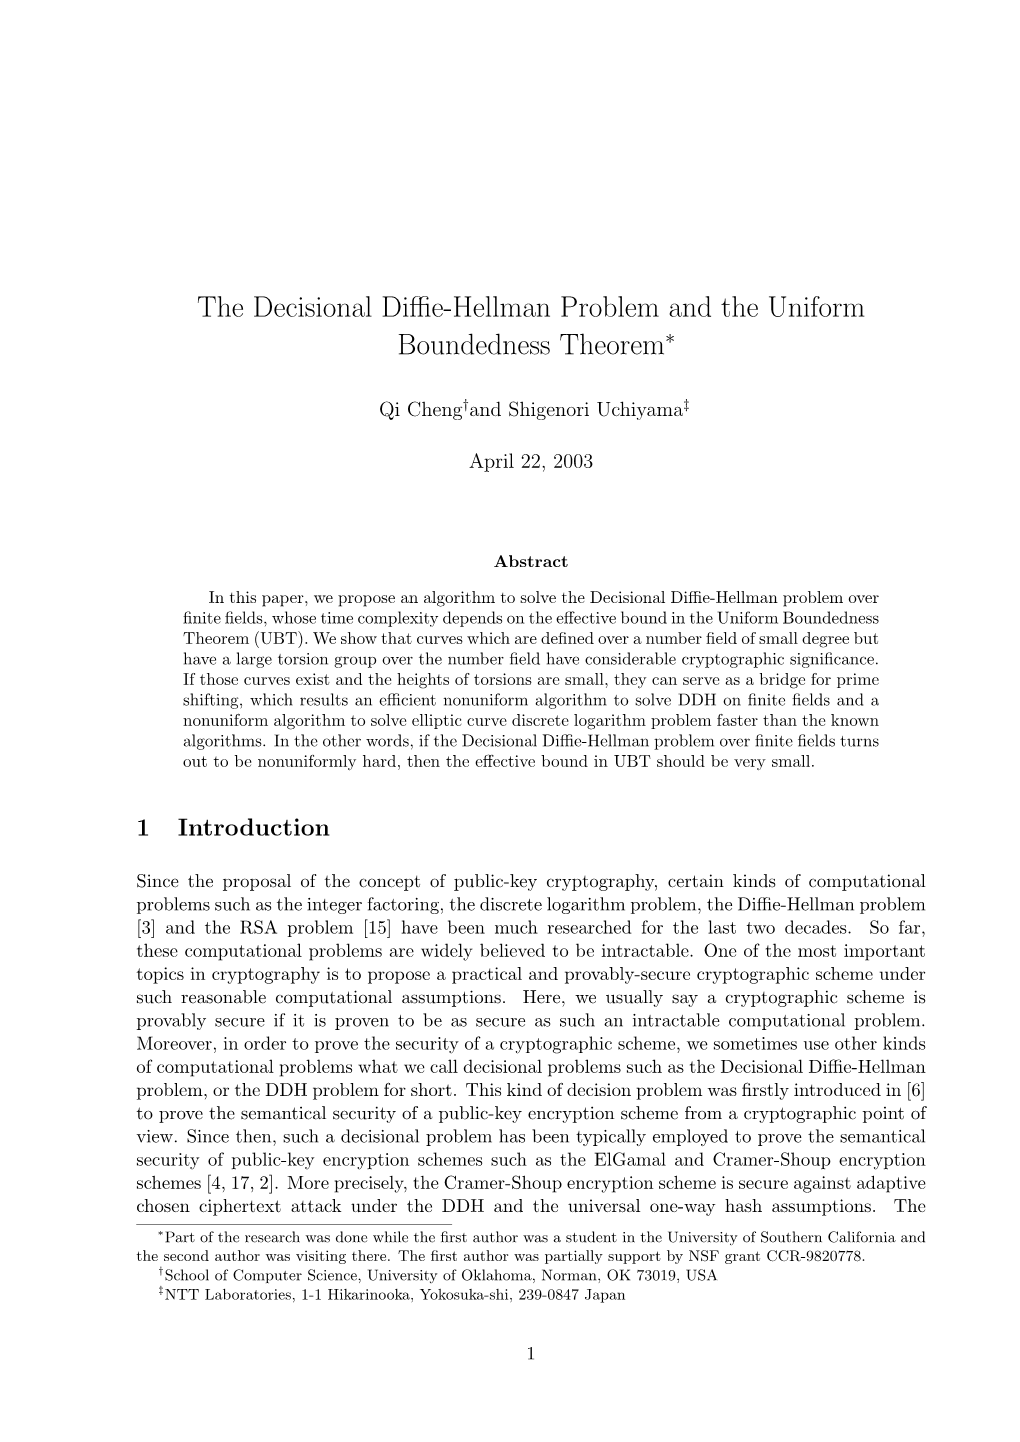 The Decisional Diffie-Hellman Problem and the Uniform